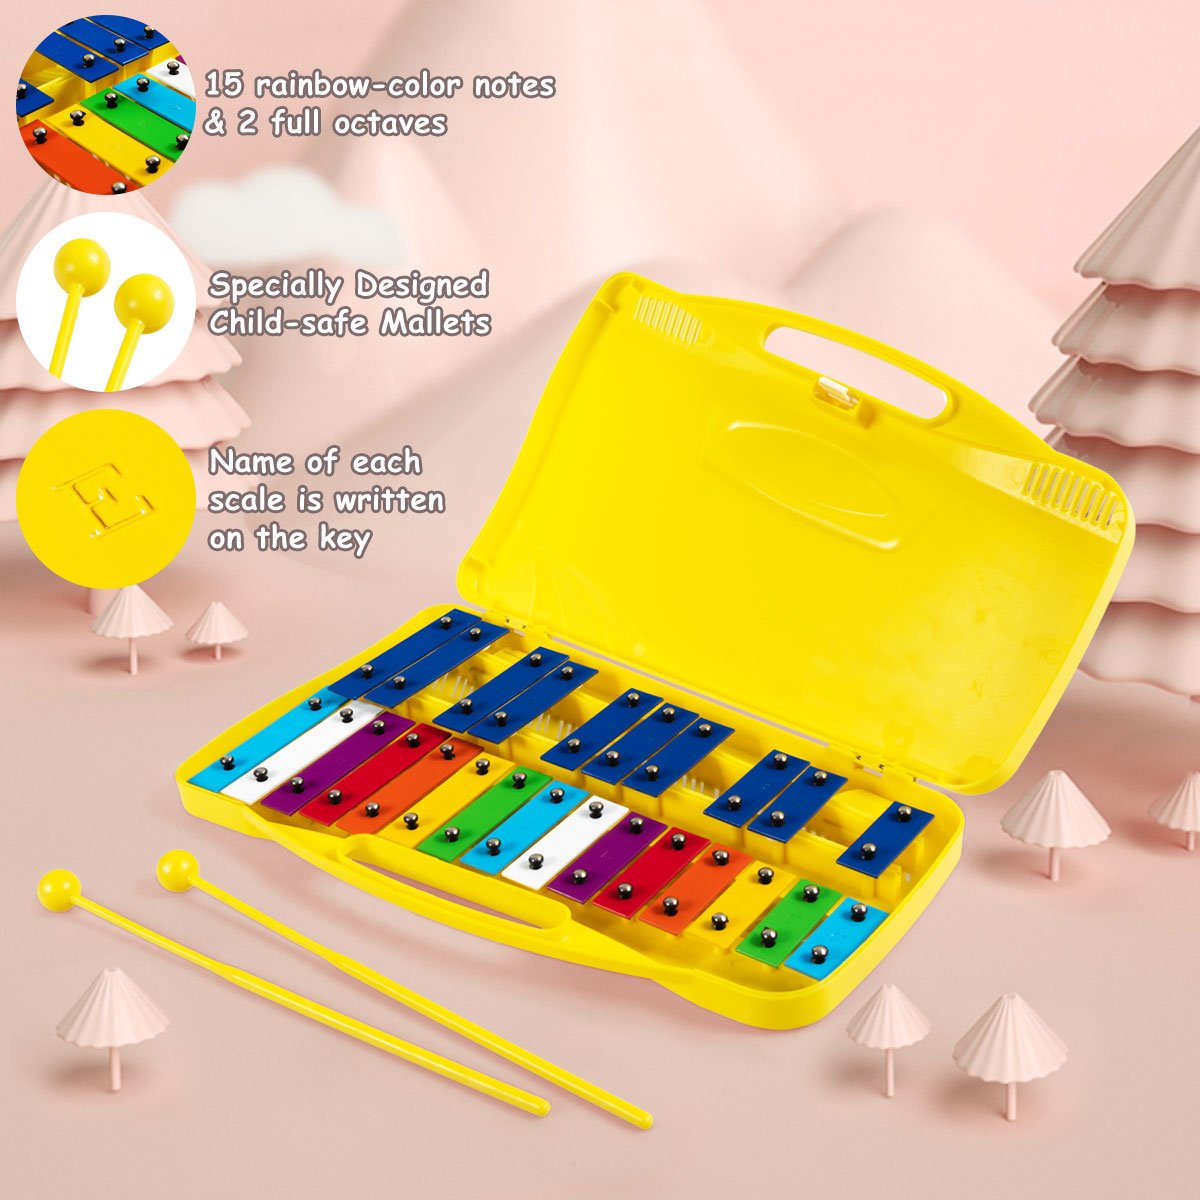 Joyful Rhythms: 25 Note Xylophone with Suitcase for Kids Yellow